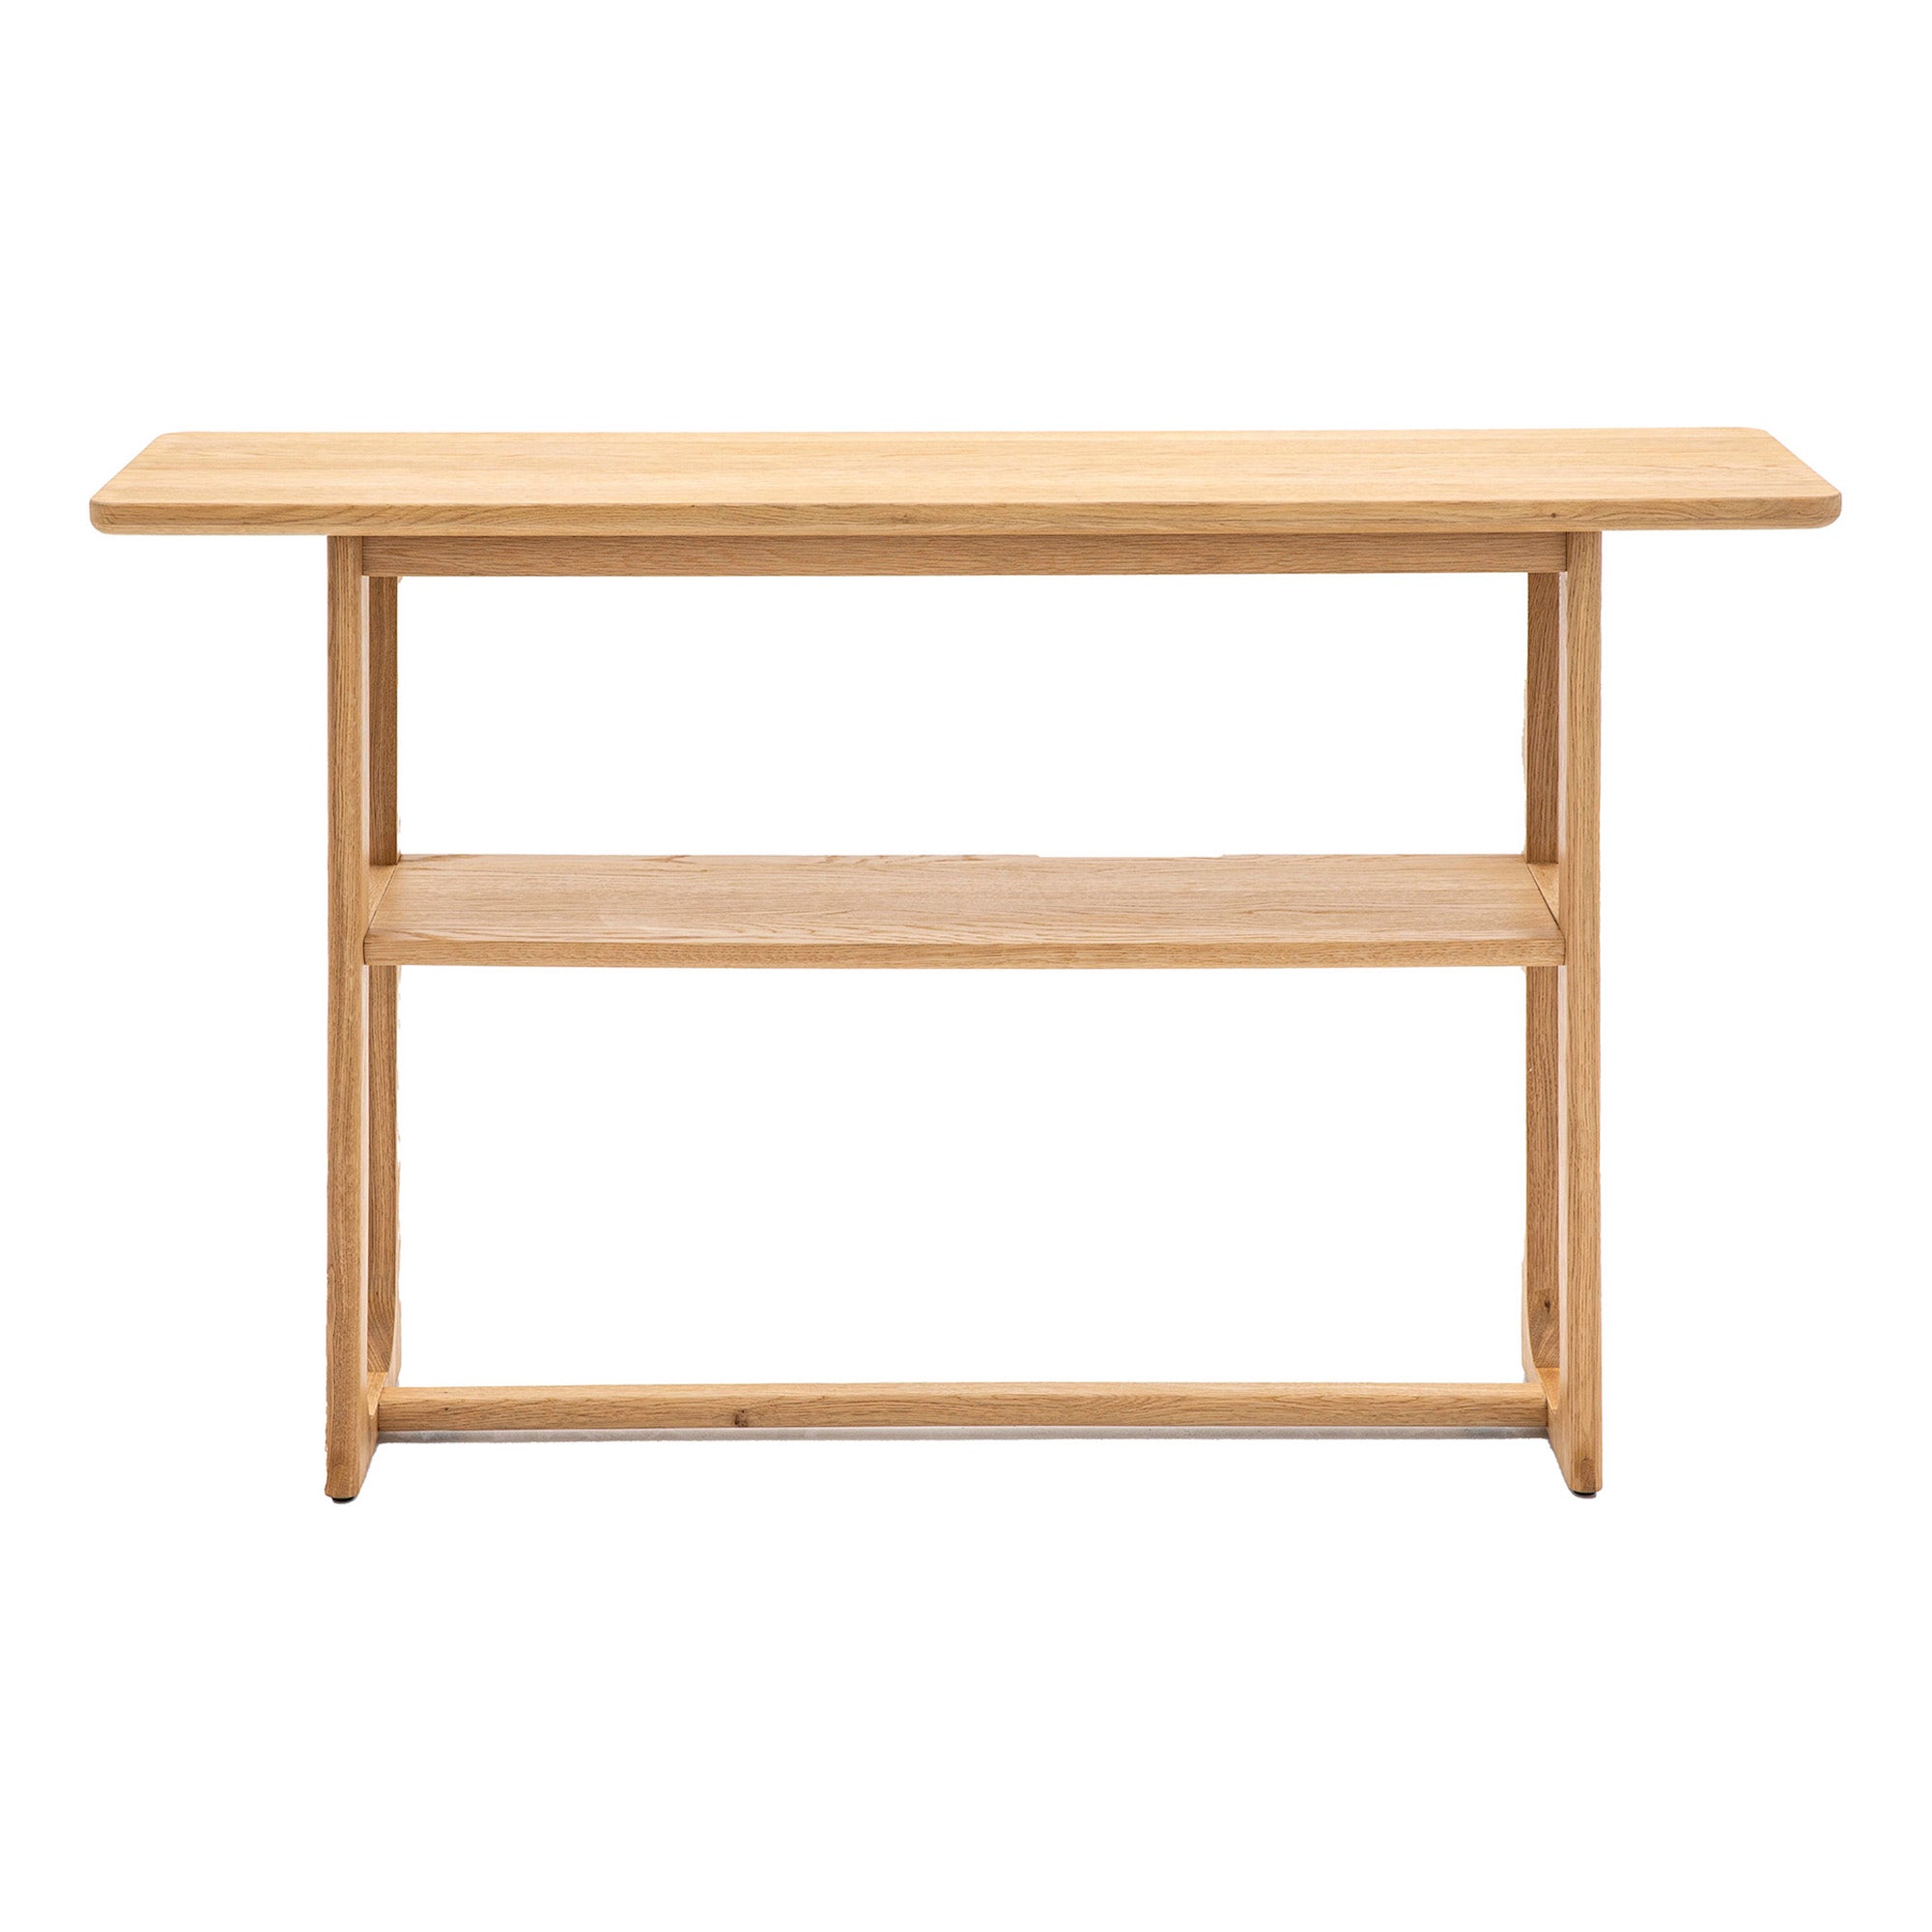 The Finest Wooden Console Table